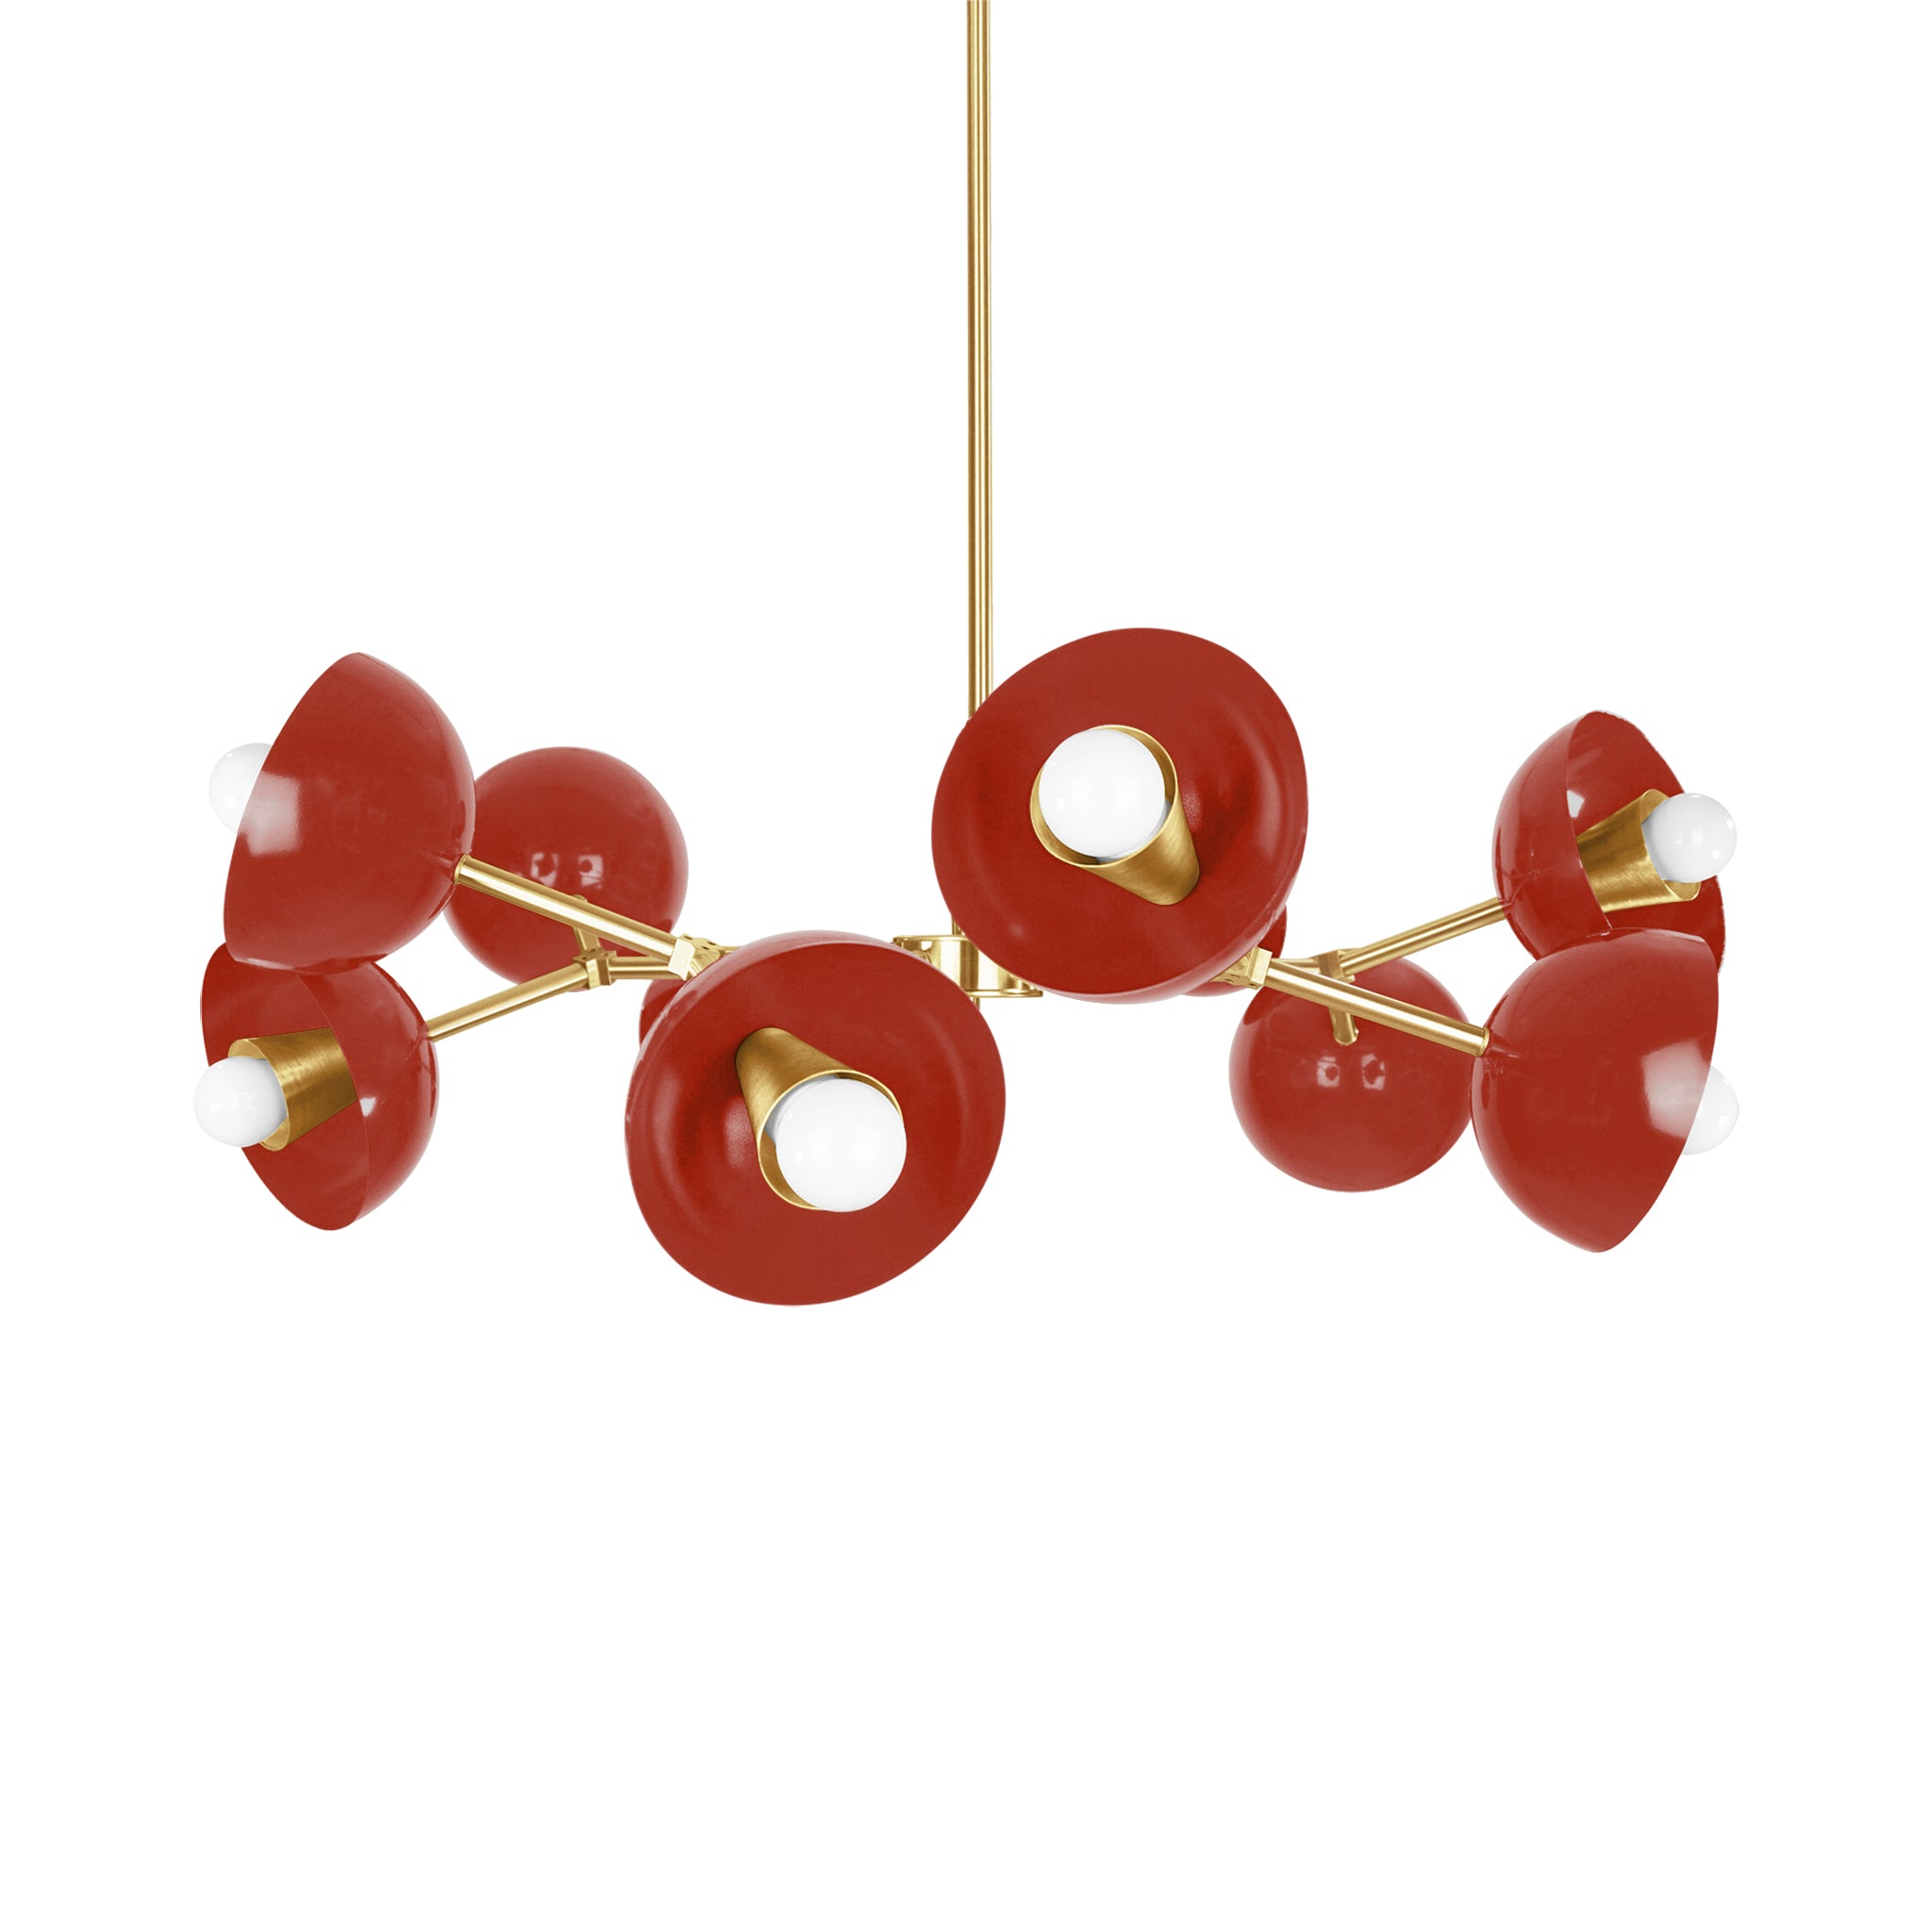 Brass and riding hood red color Alegria chandelier 30" Dutton Brown lighting